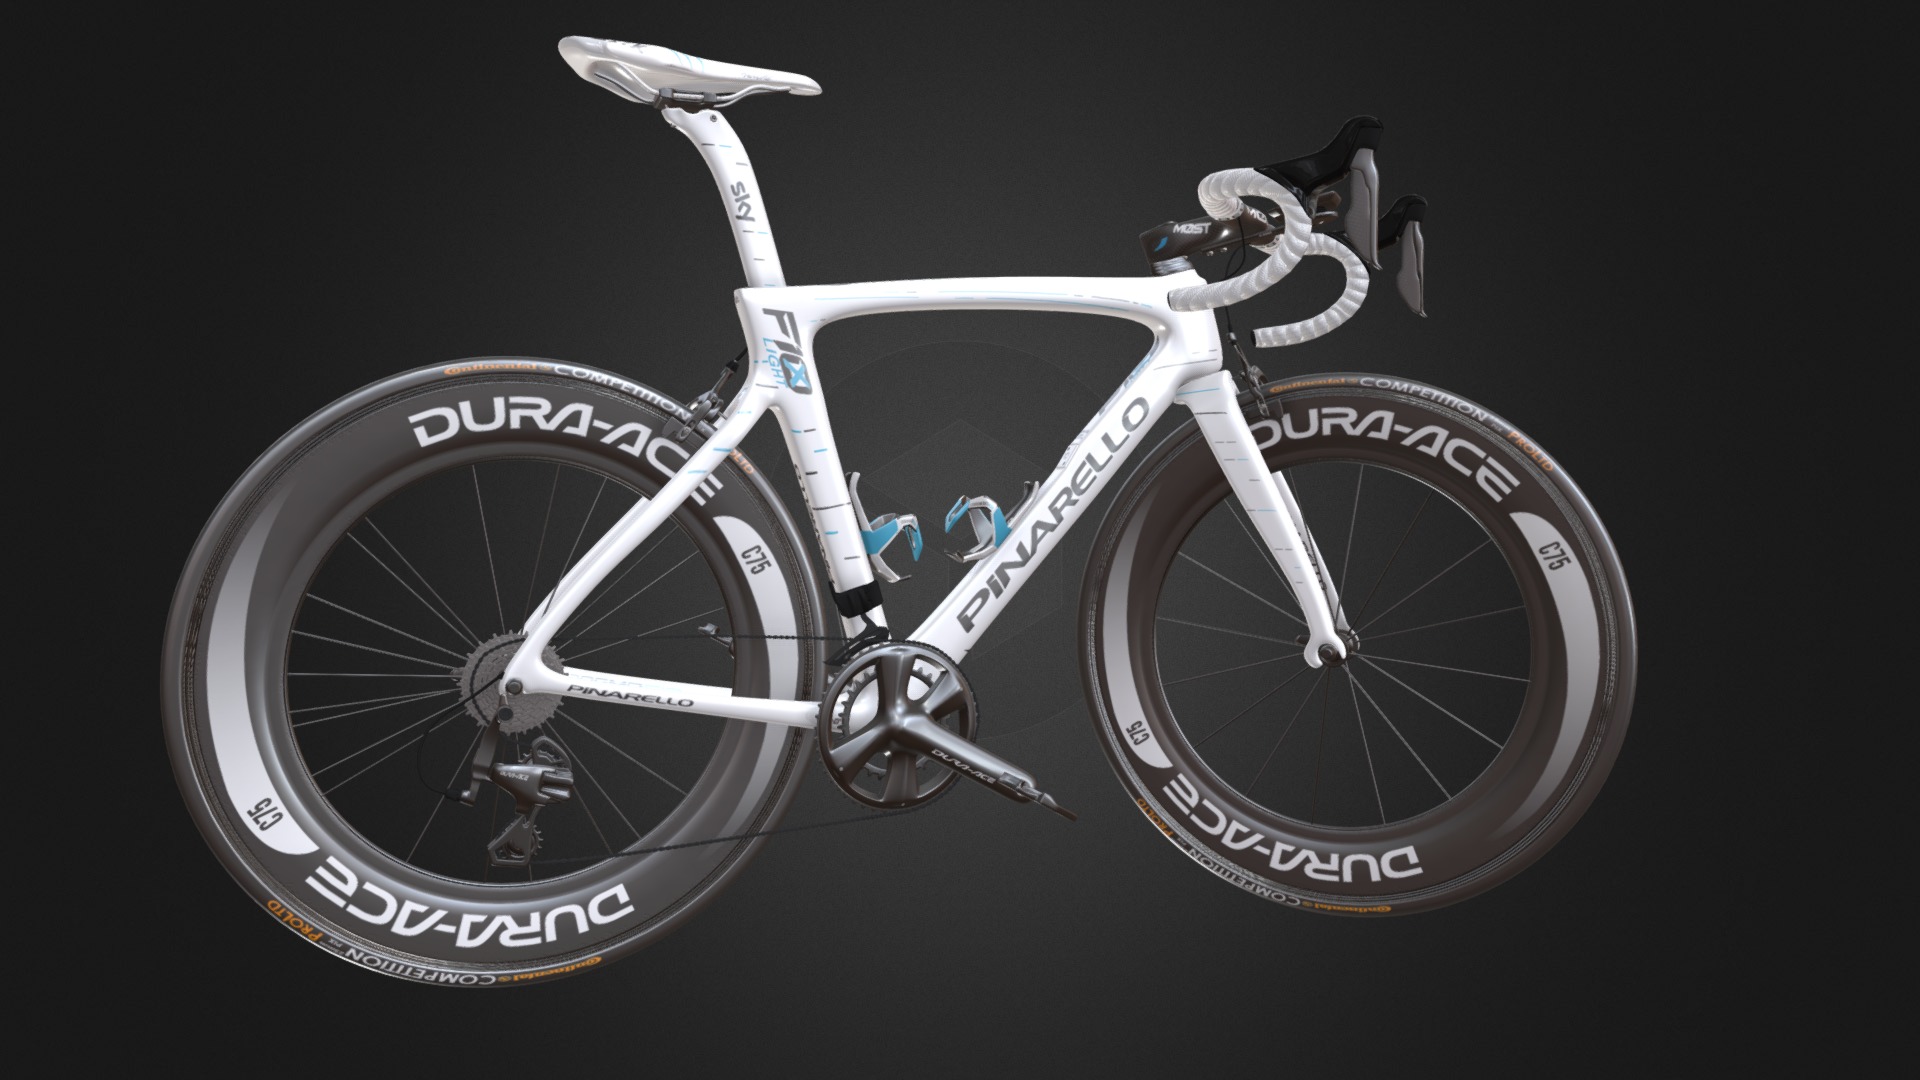 3D model Piranello DOGMA F10 X-LIGHT white - This is a 3D model of the Piranello DOGMA F10 X-LIGHT white. The 3D model is about a white and black bicycle.